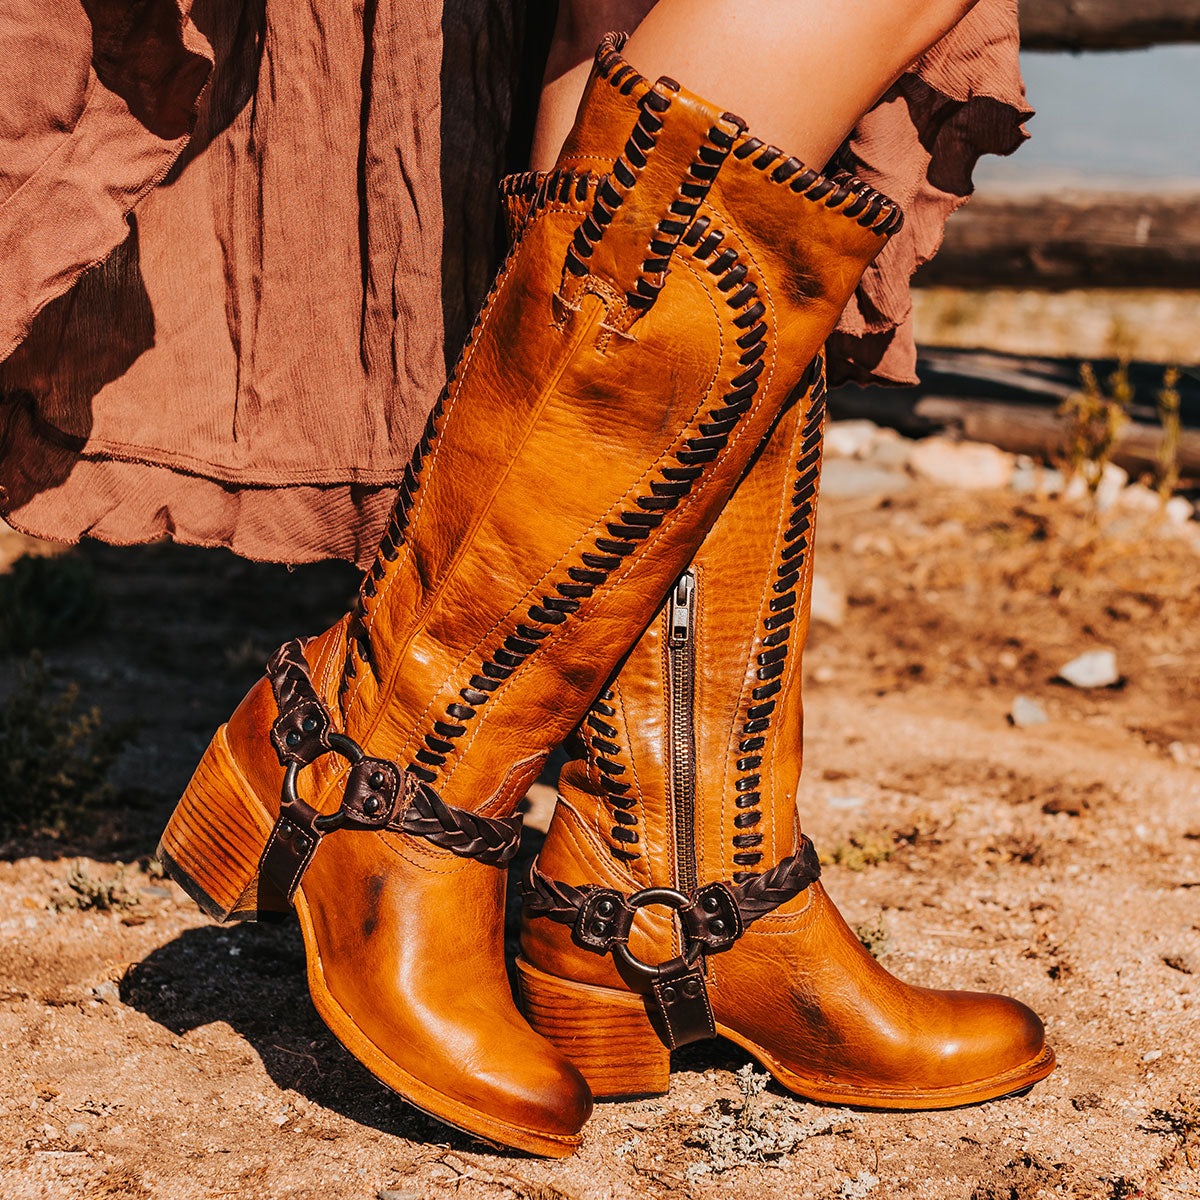 FREEBIRD women's Clover wheat leather boot with whip stitch detailing, inside half zip closure and braided ankle harness